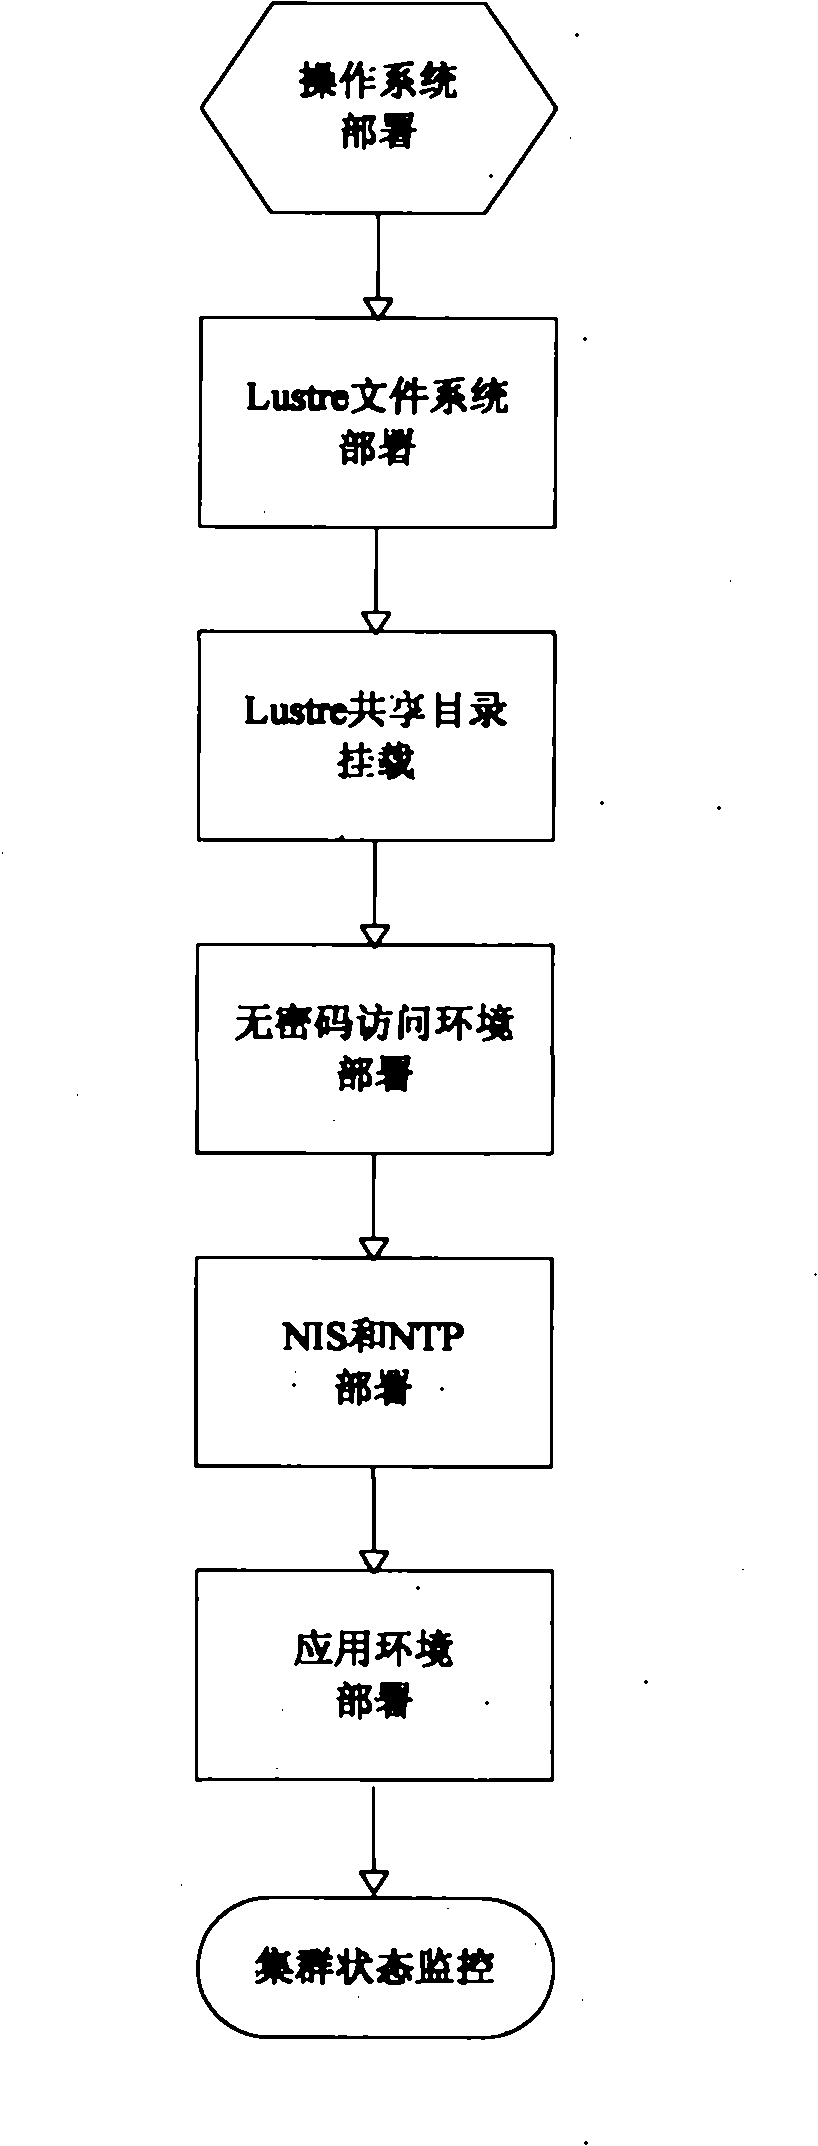 Deployment method of cluster parallel computing environment